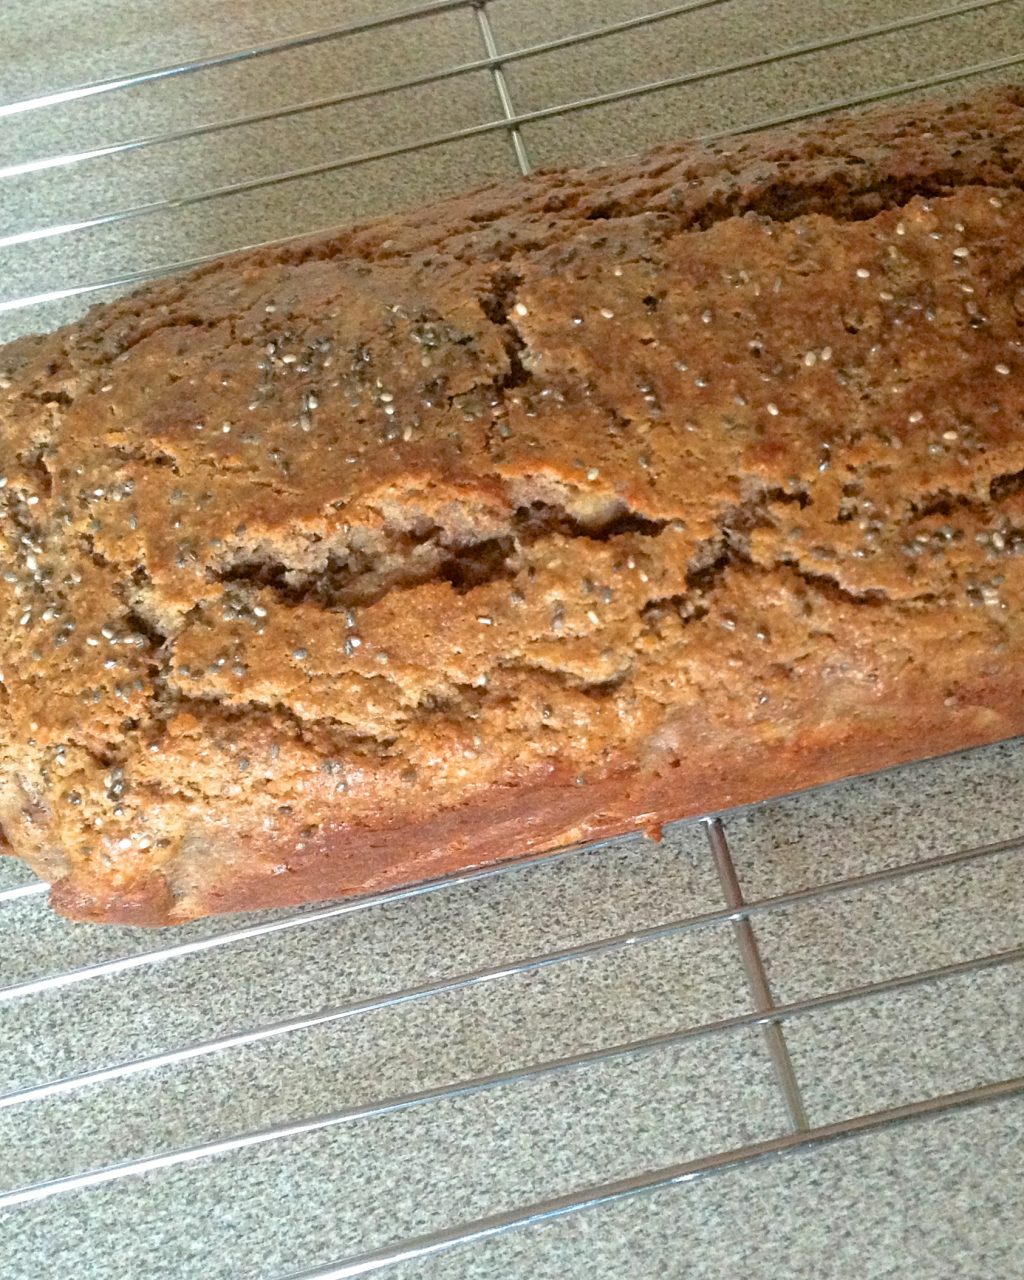 A loaf of banana walnut bread cooling on a wire rack